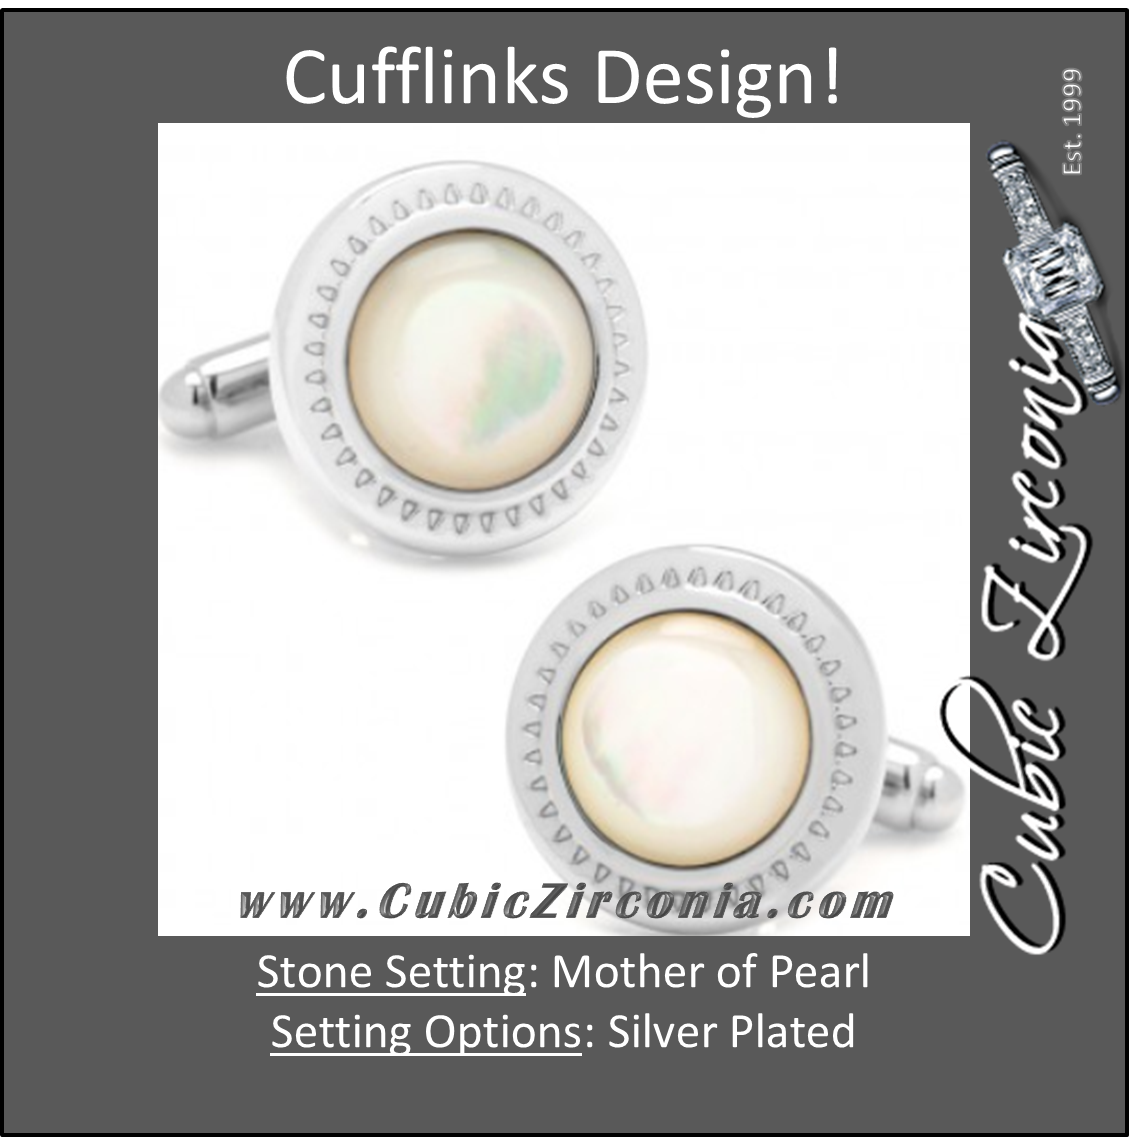 Men’s Cufflinks- Mother of Pearl with Etched Circular Border